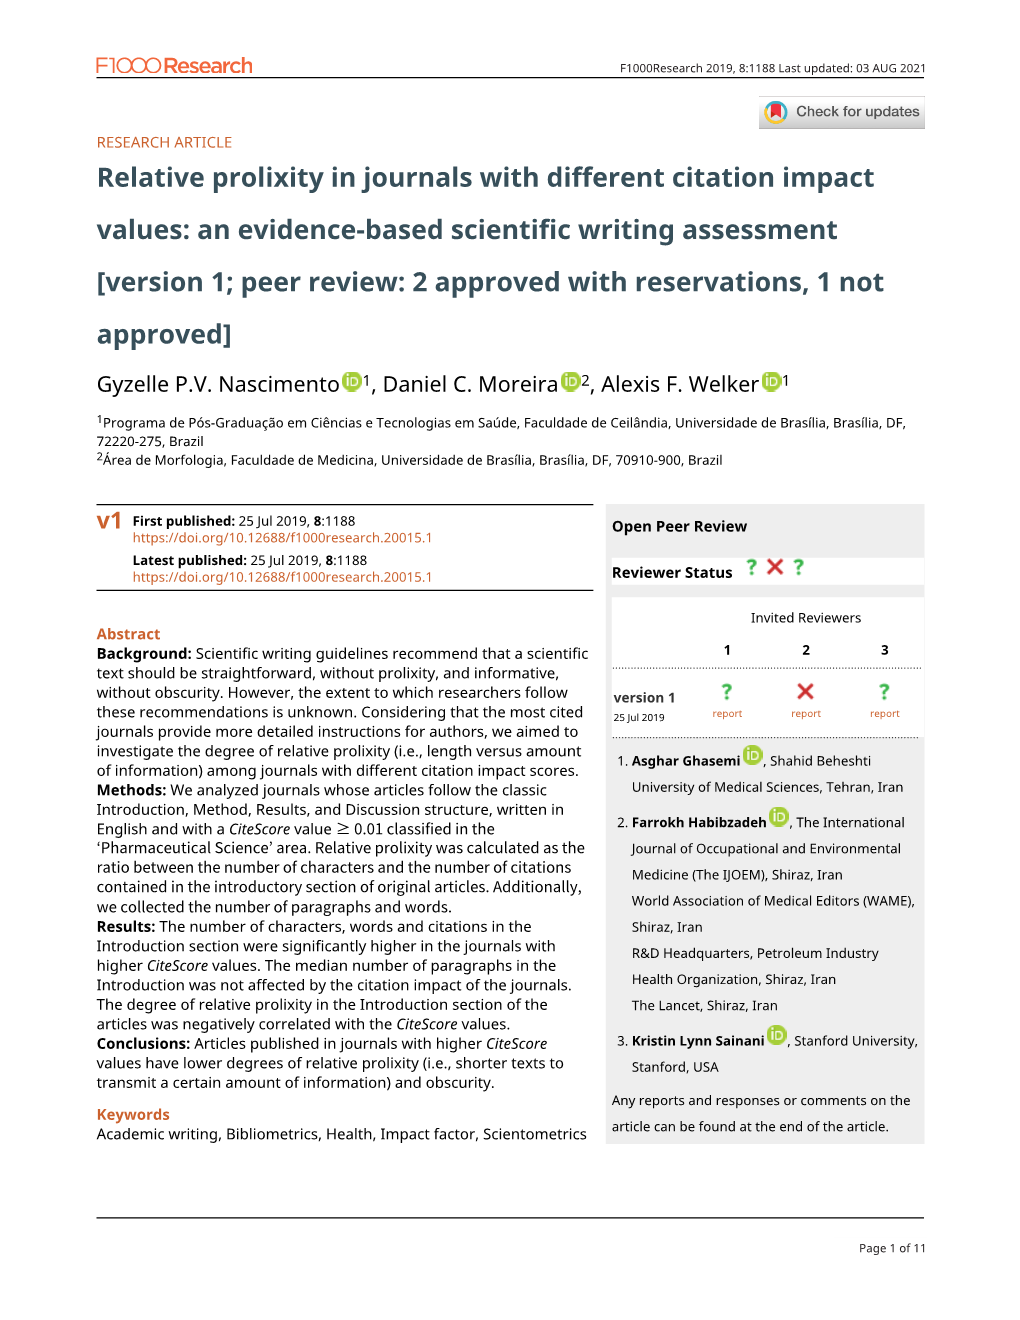 Relative Prolixity in Journals with Different Citation Impact Values